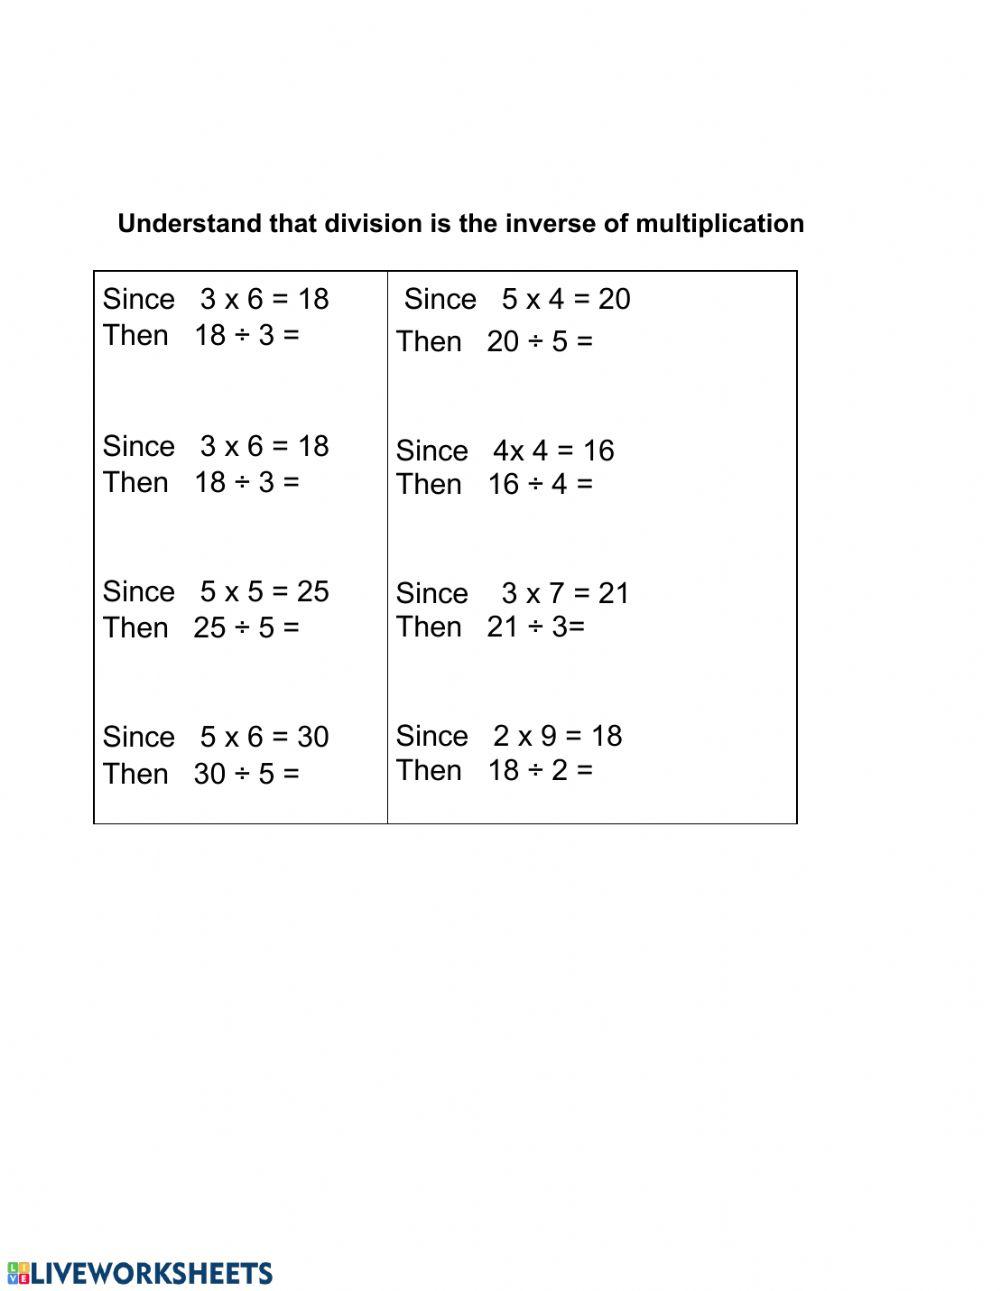 Division is the inverse of multiplication